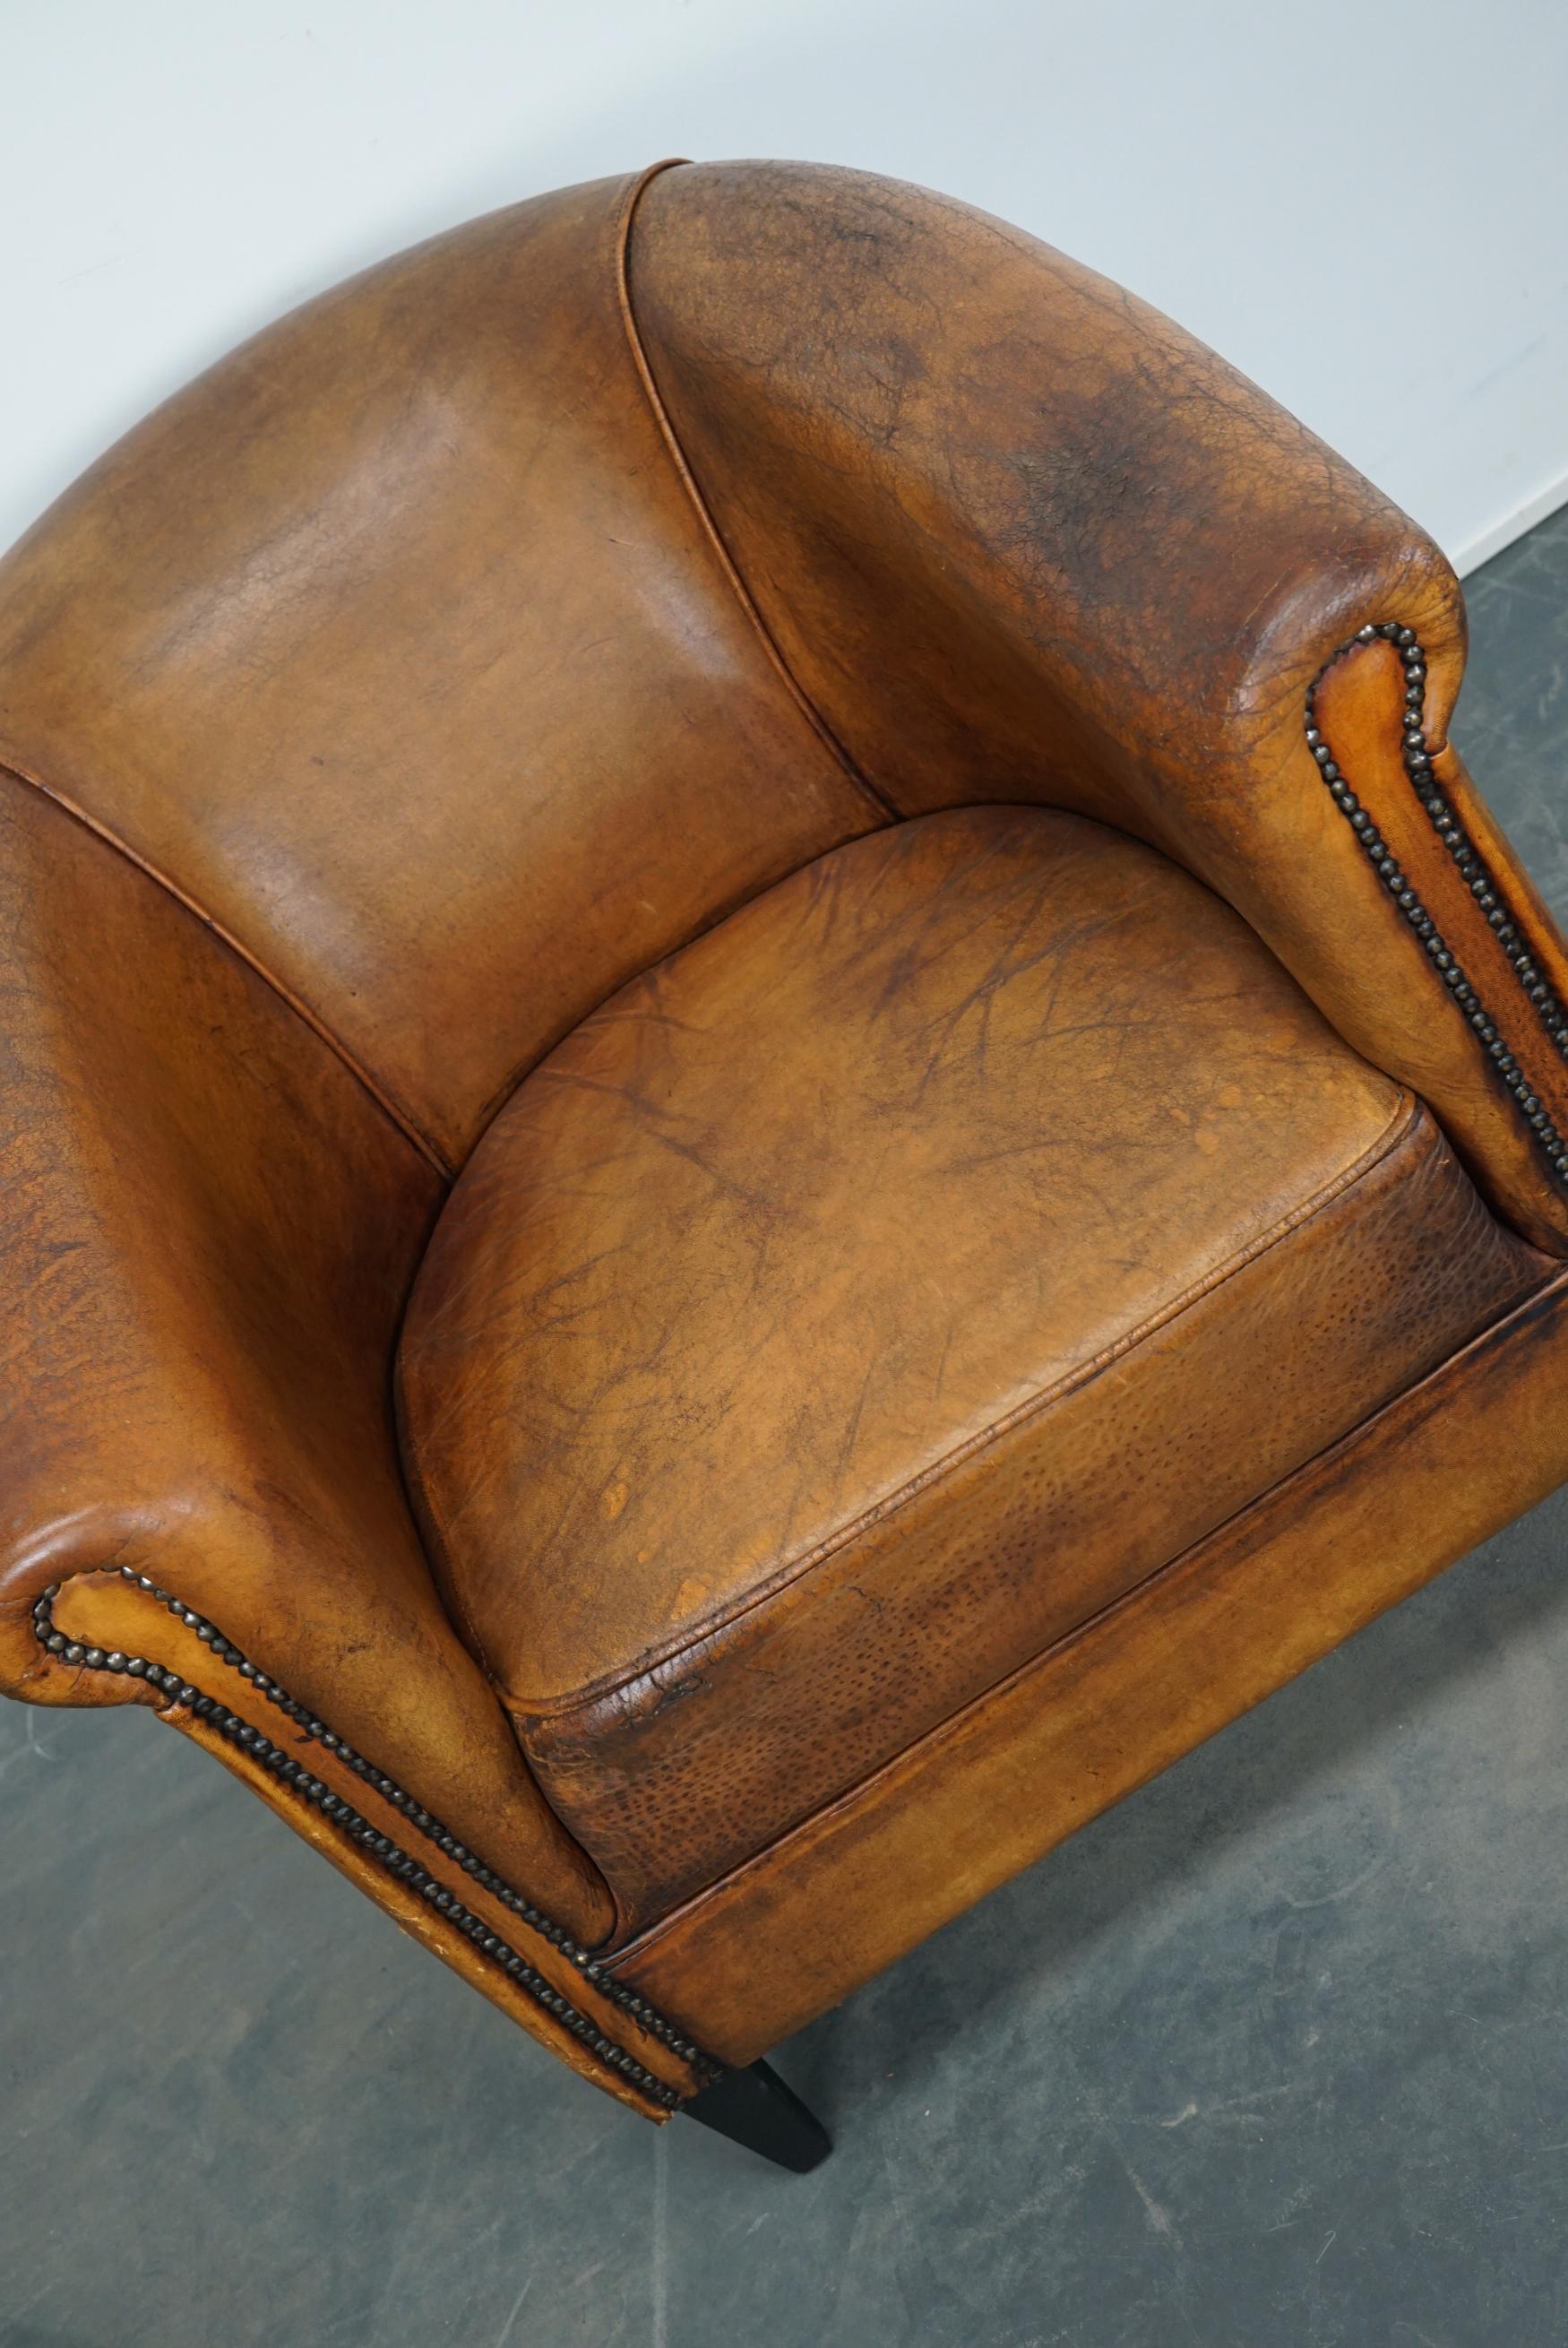 This vintage cognac-colored leather club chair comes from the Netherlands. It is upholstered with cognac-colored leather and features metal rivets and wooden legs.